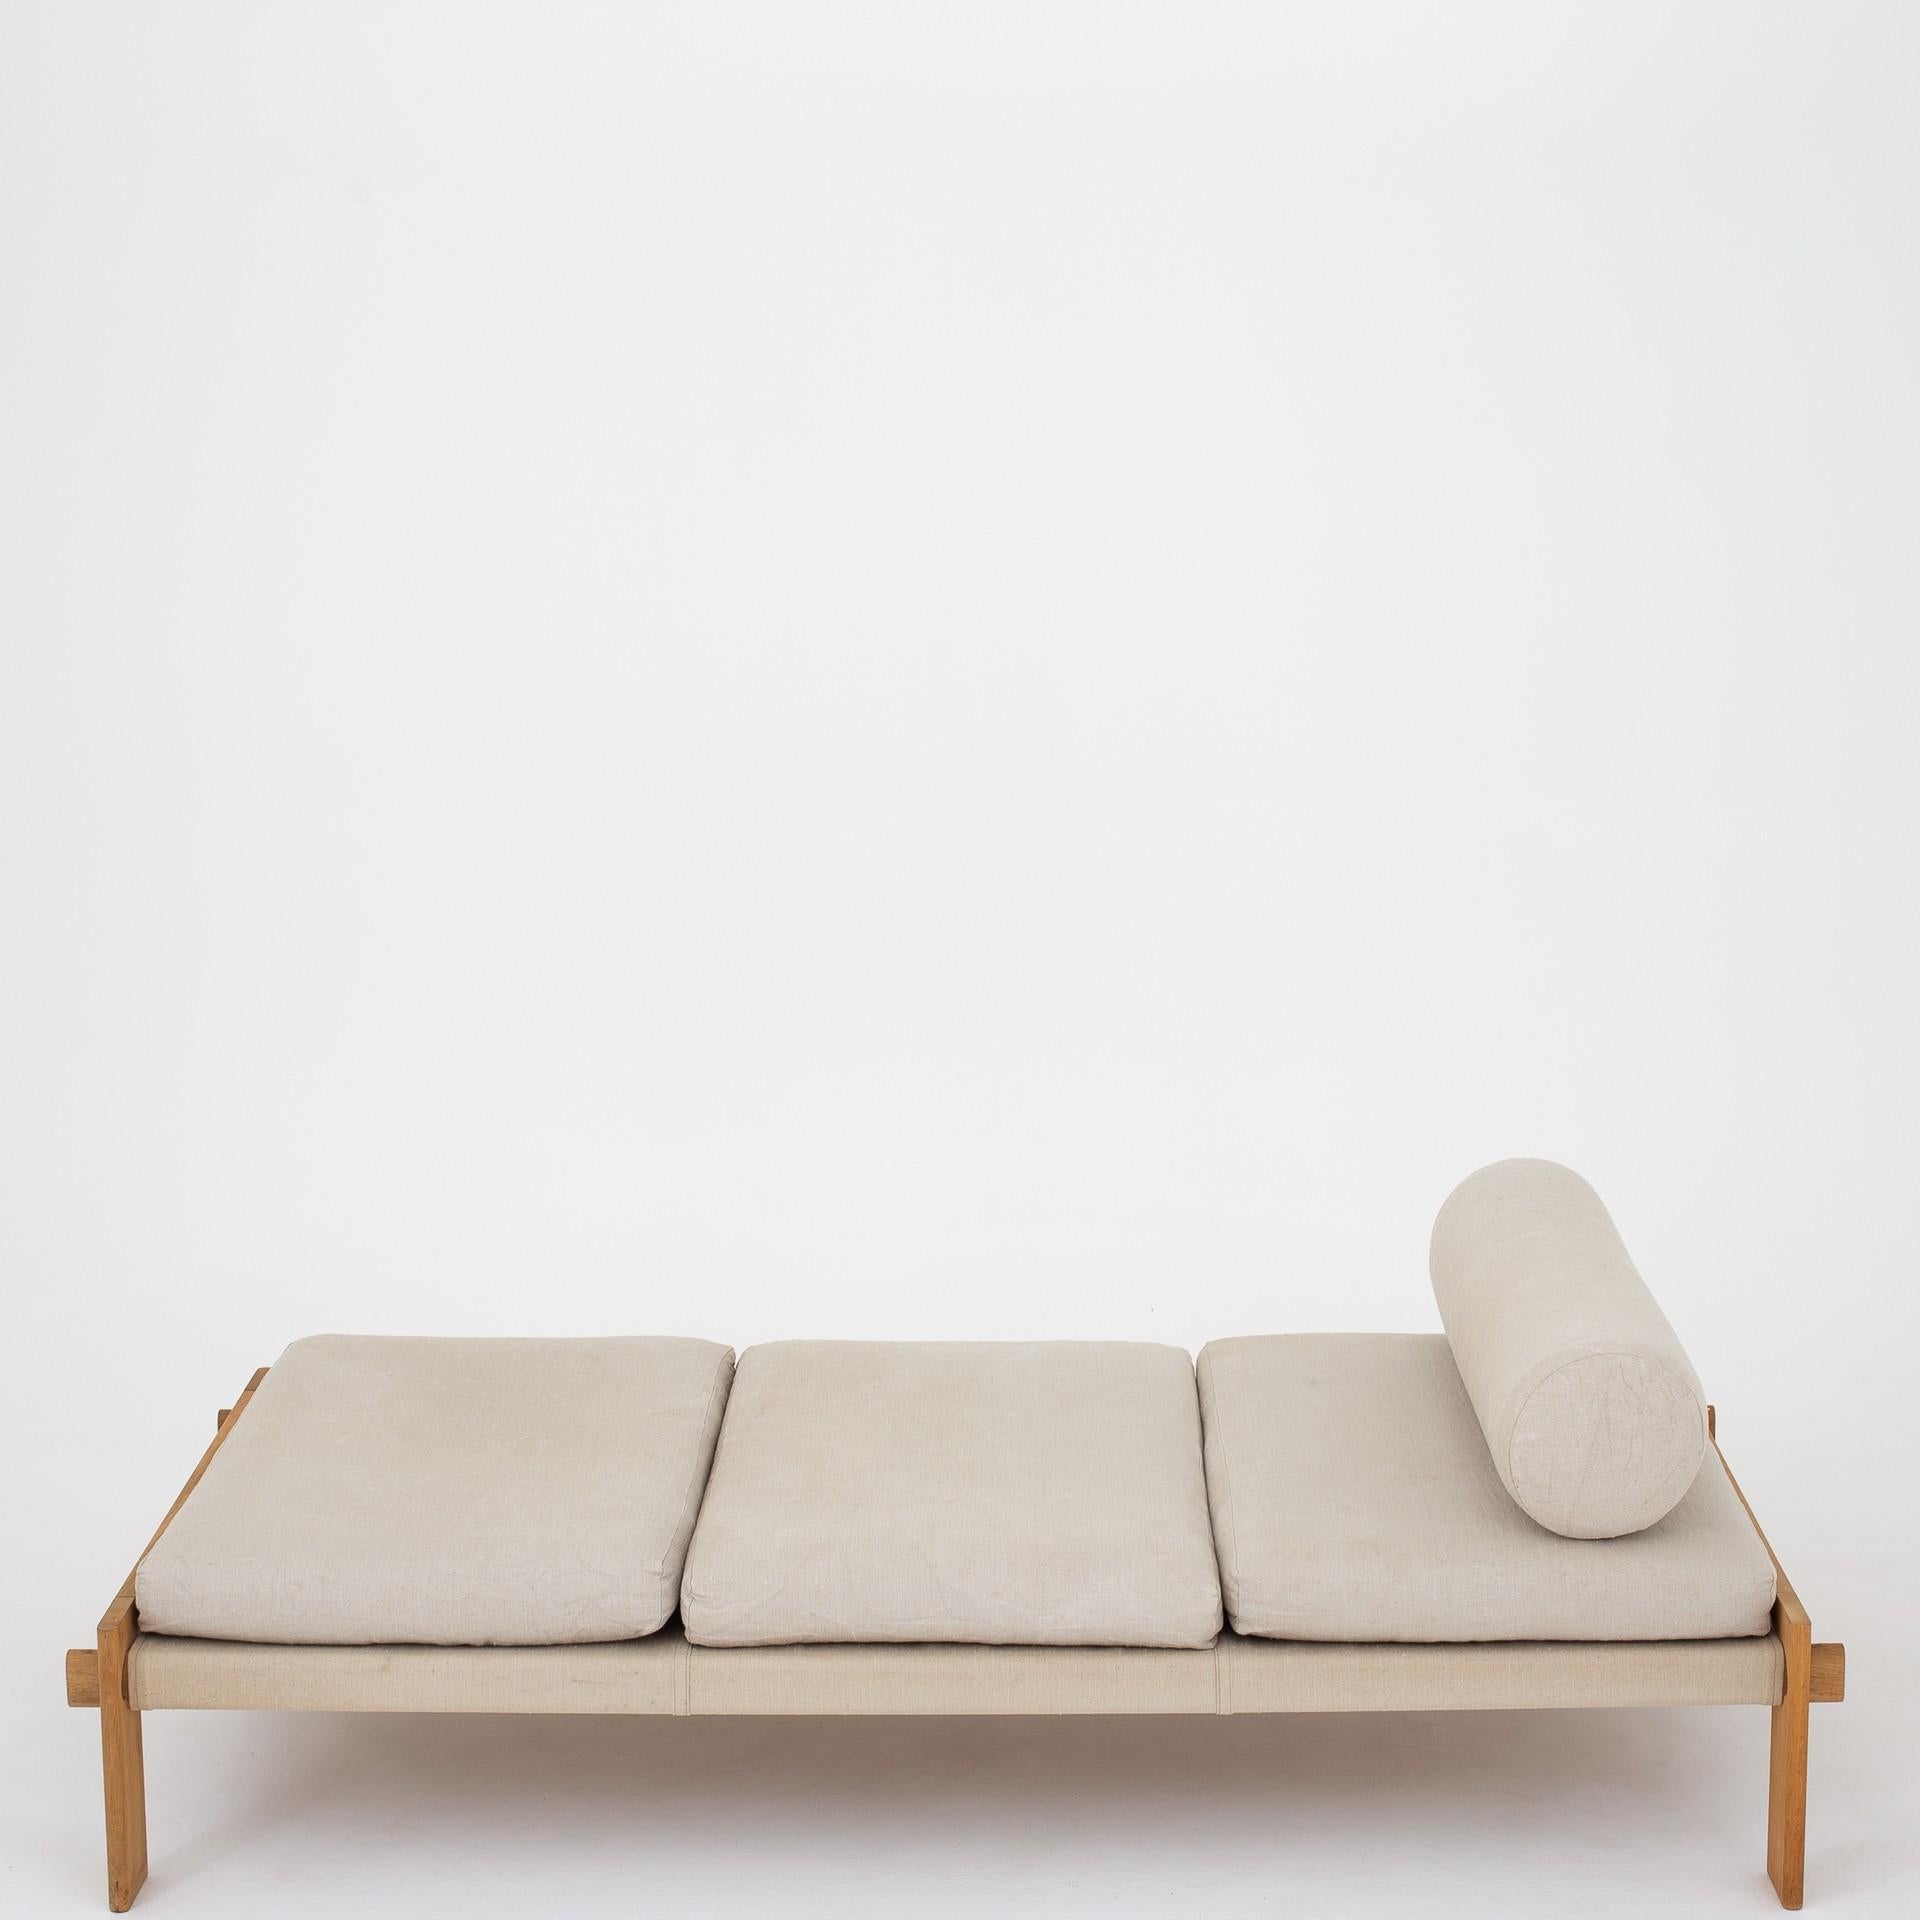 Set of Daybeds with Table by Tage Poulsen 1